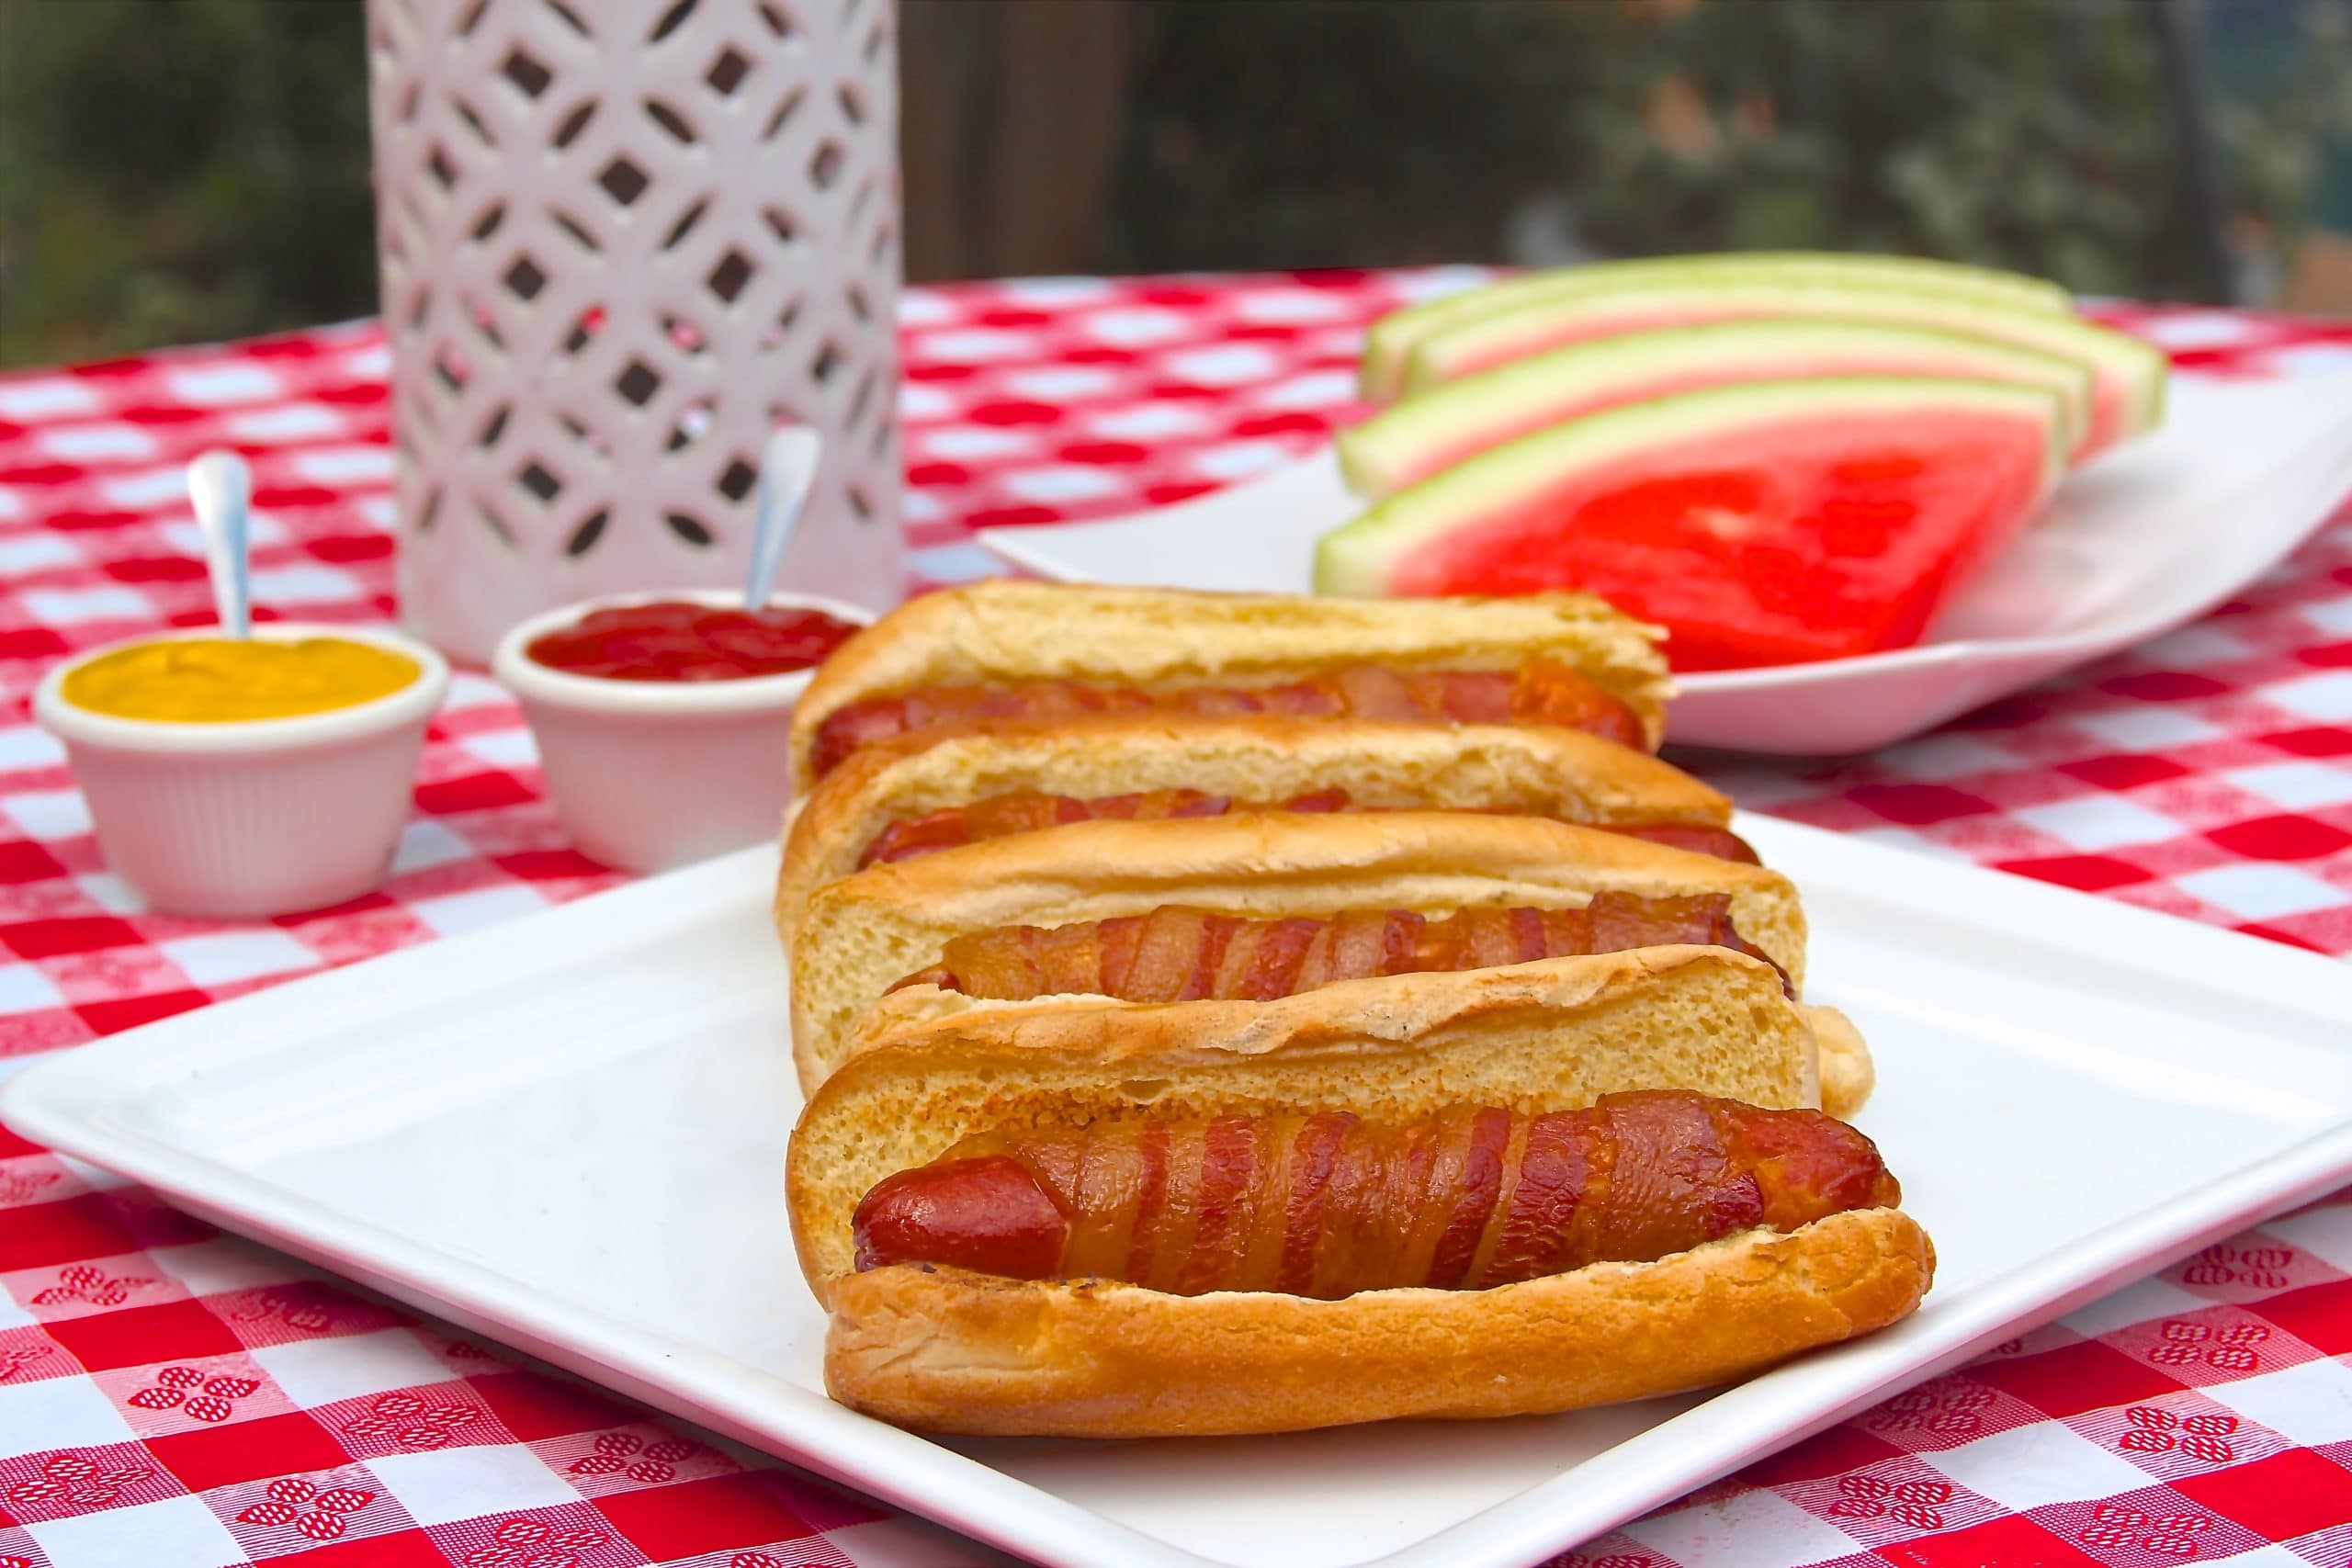 Bacon Wrapped Cheese Hot Dogs ⋆ Real Housemoms